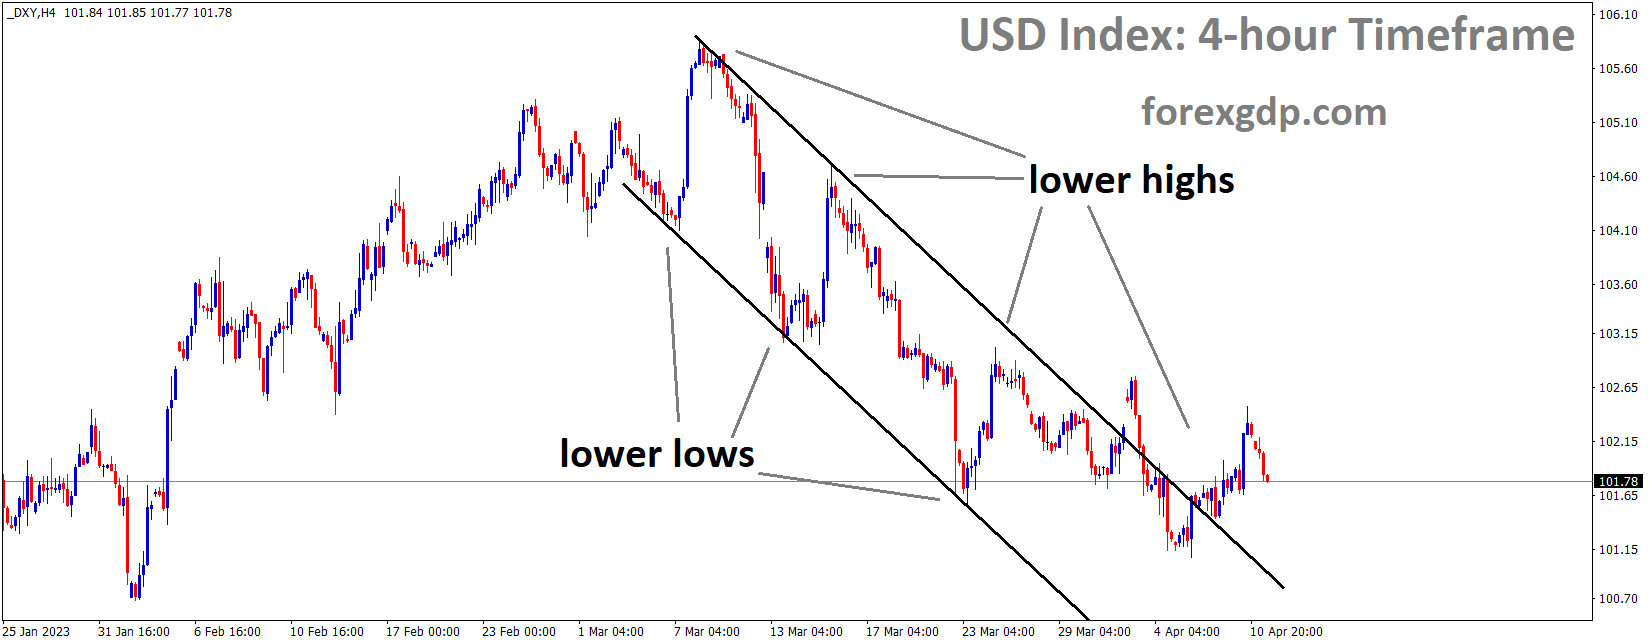 DXY US Dollar index is moving in the Descending channel and the market has reached the lower high area of the channel 2